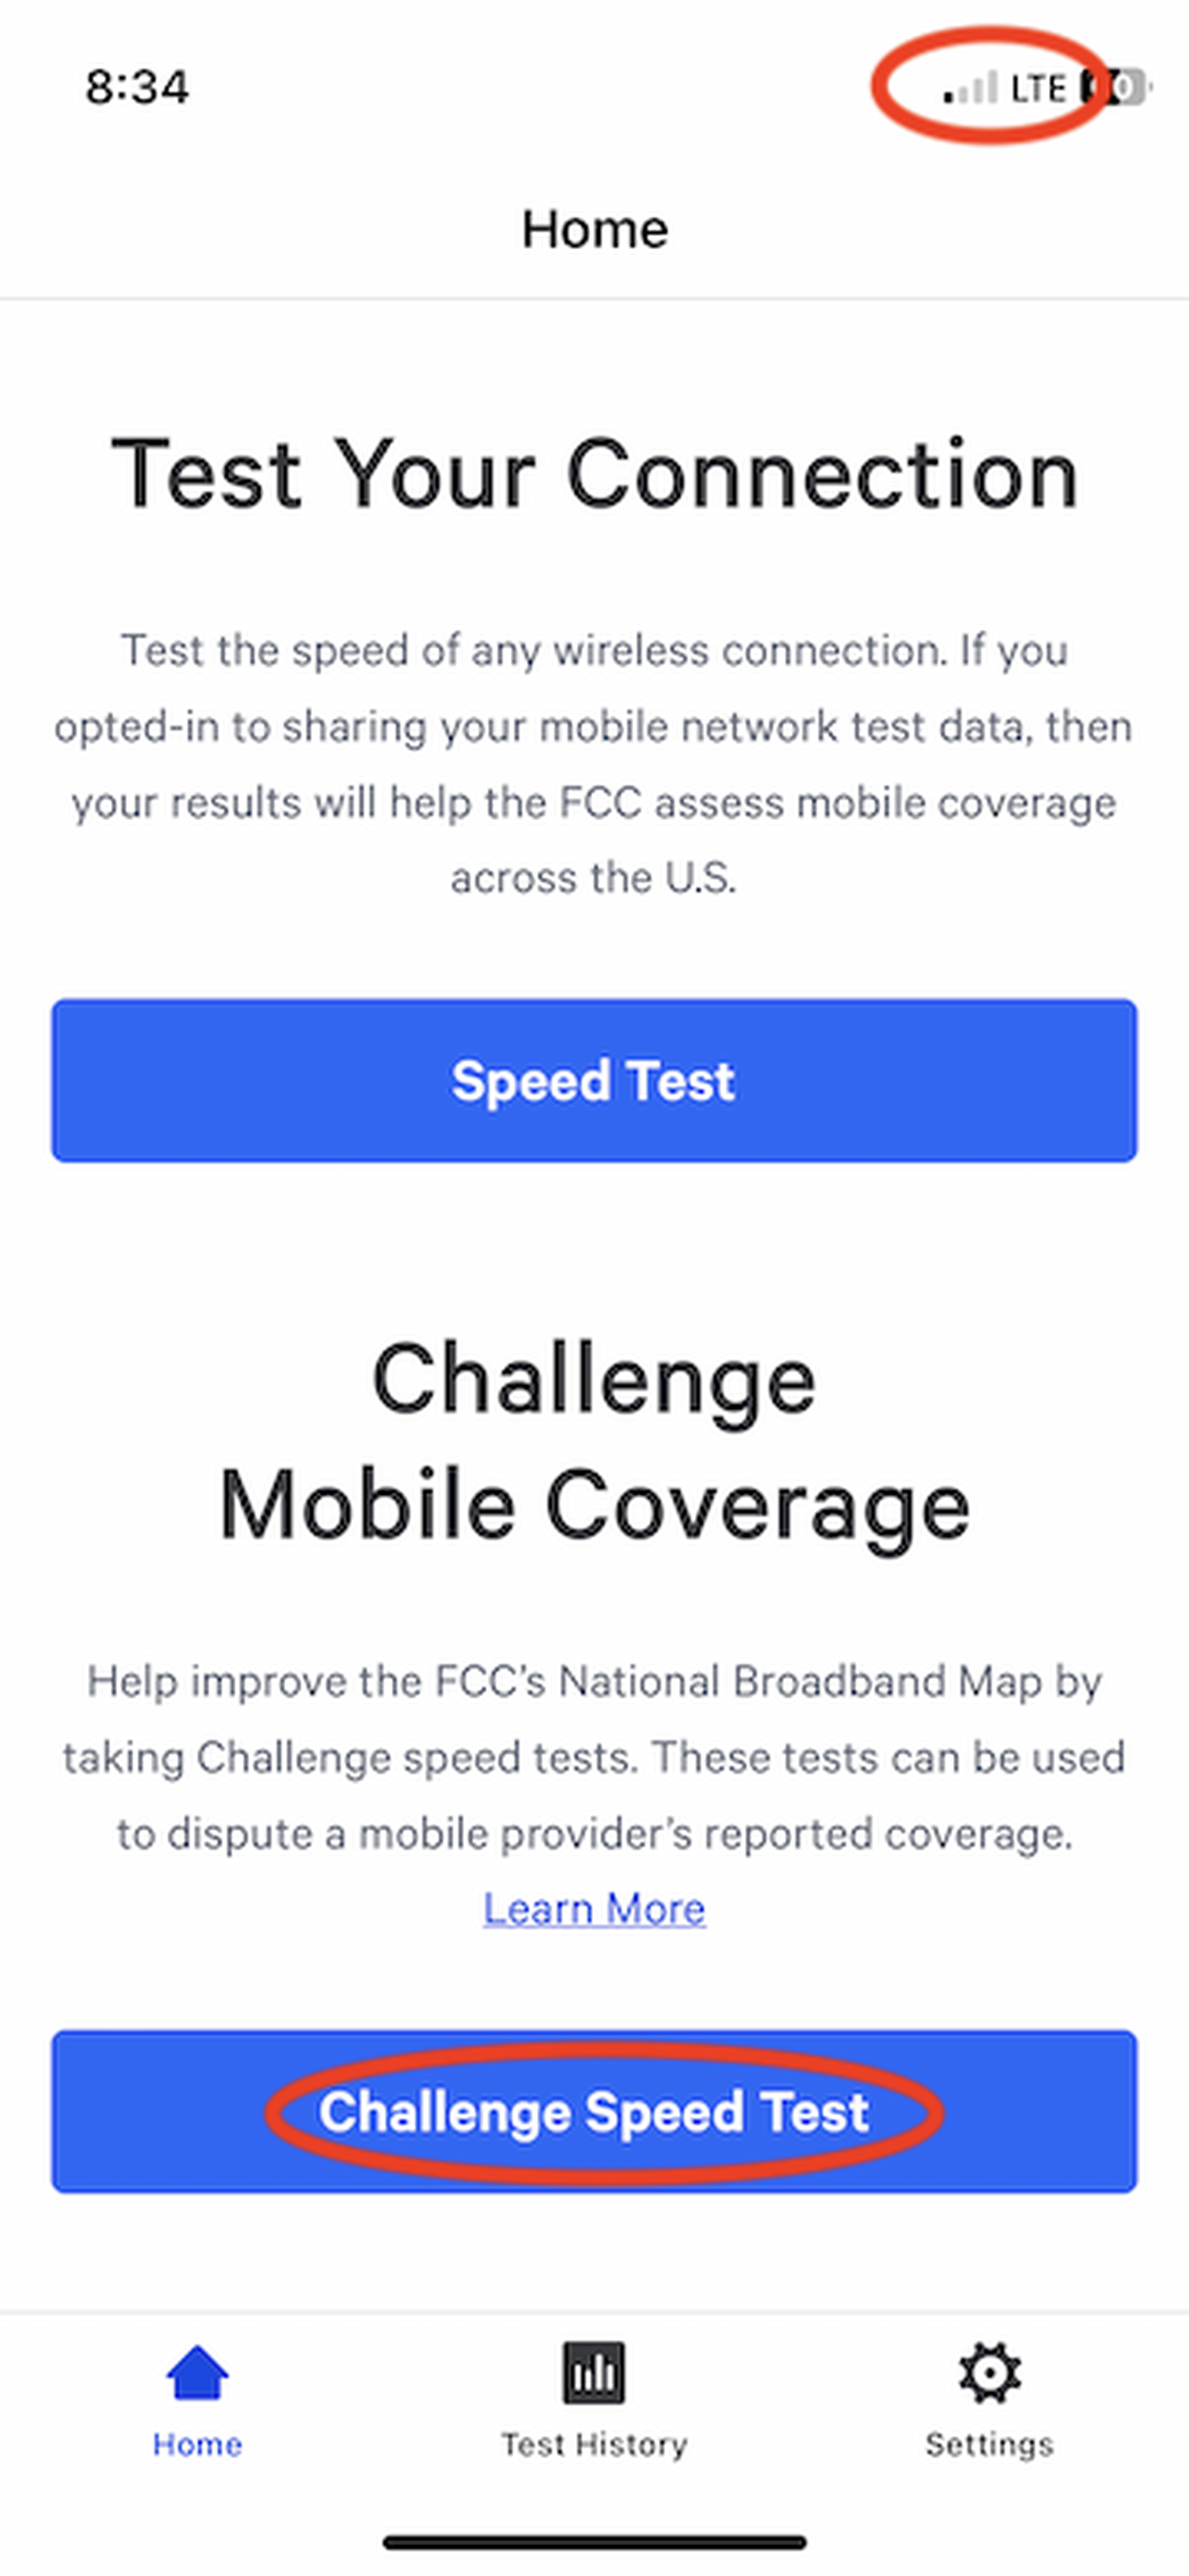 Starting a Challenge Speed Test with one bar of LTE coverage - supposedly